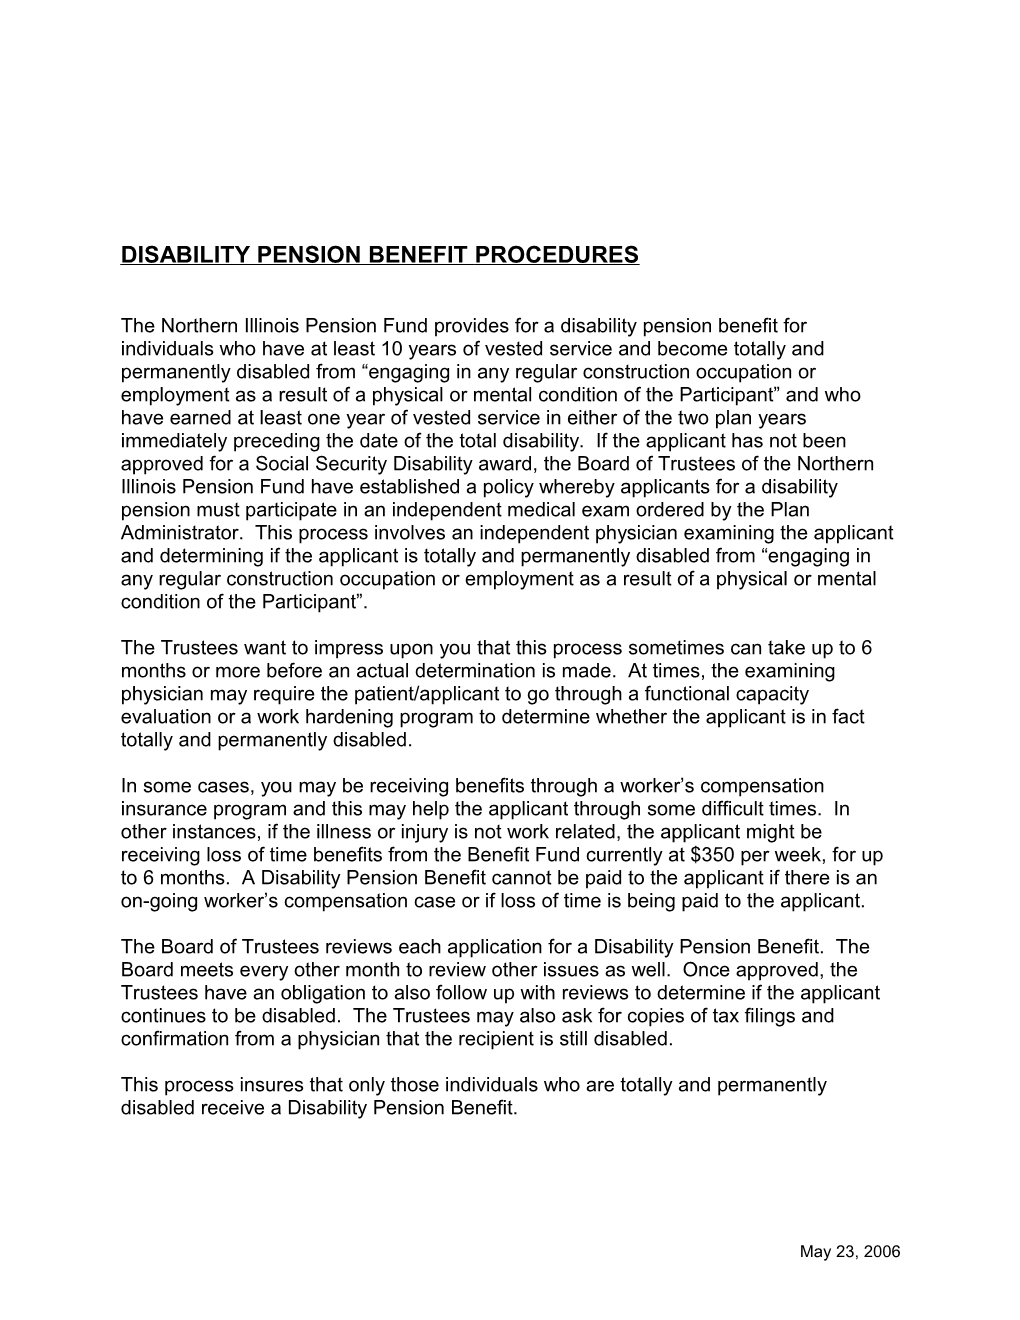 Disability Pension Benefit